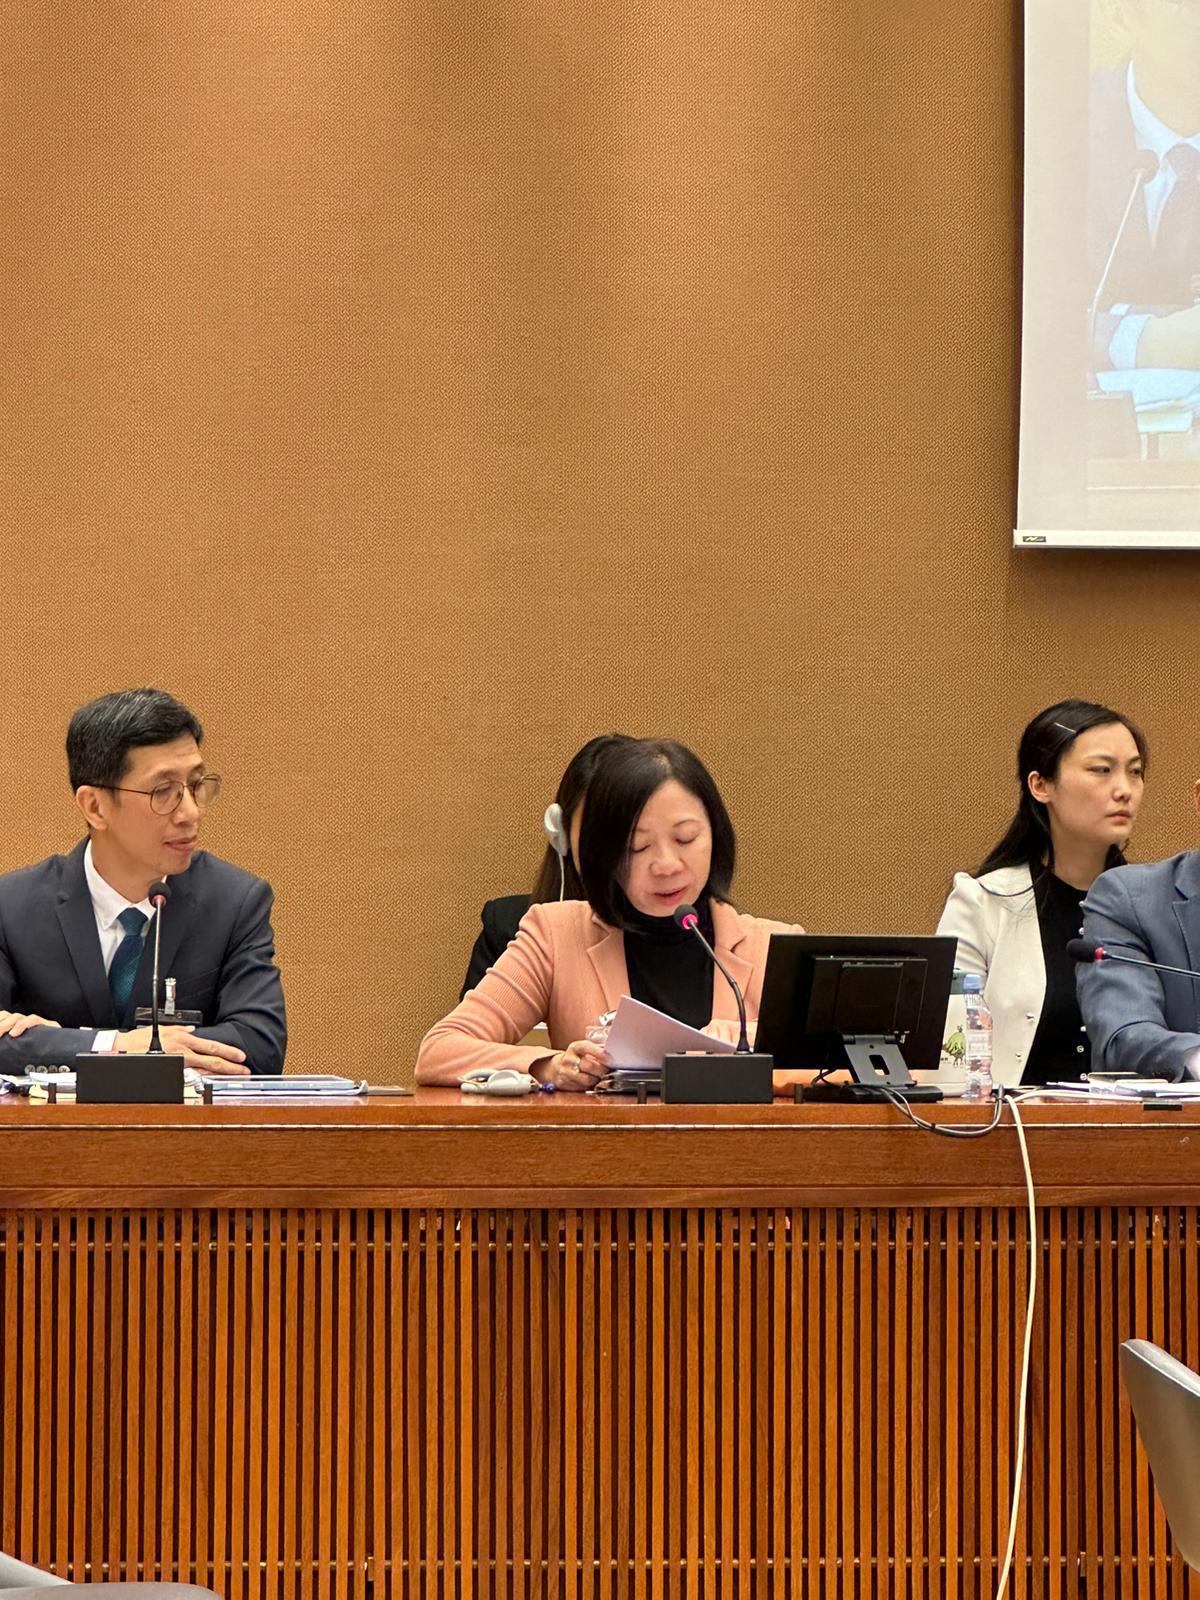 The Permanent Secretary for Home and Youth Affairs, Ms Shirley Lam, delivers opening statement at the United Nations Committee on the Elimination of Discrimination against Women meeting in Geneva, Switzerland today (May 12, Geneva time).
